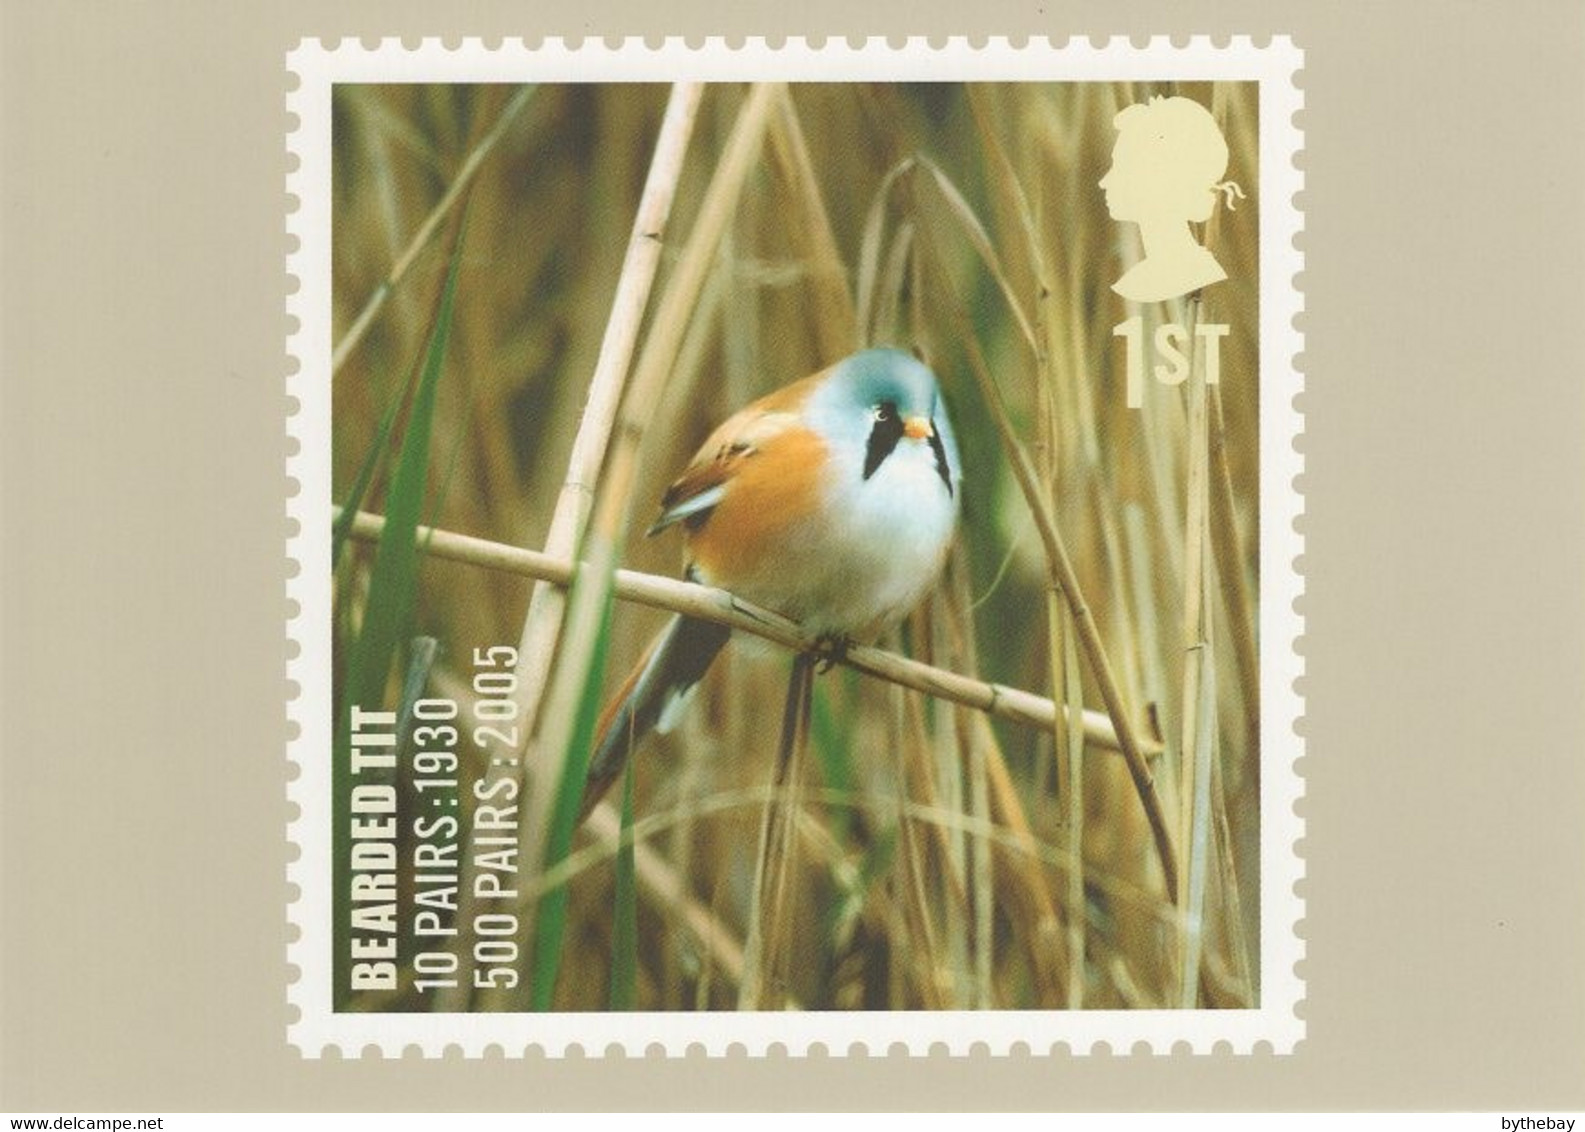 Great Britain 2007 PHQ Card Sc 2499 1st Bearded Tit - Carte PHQ